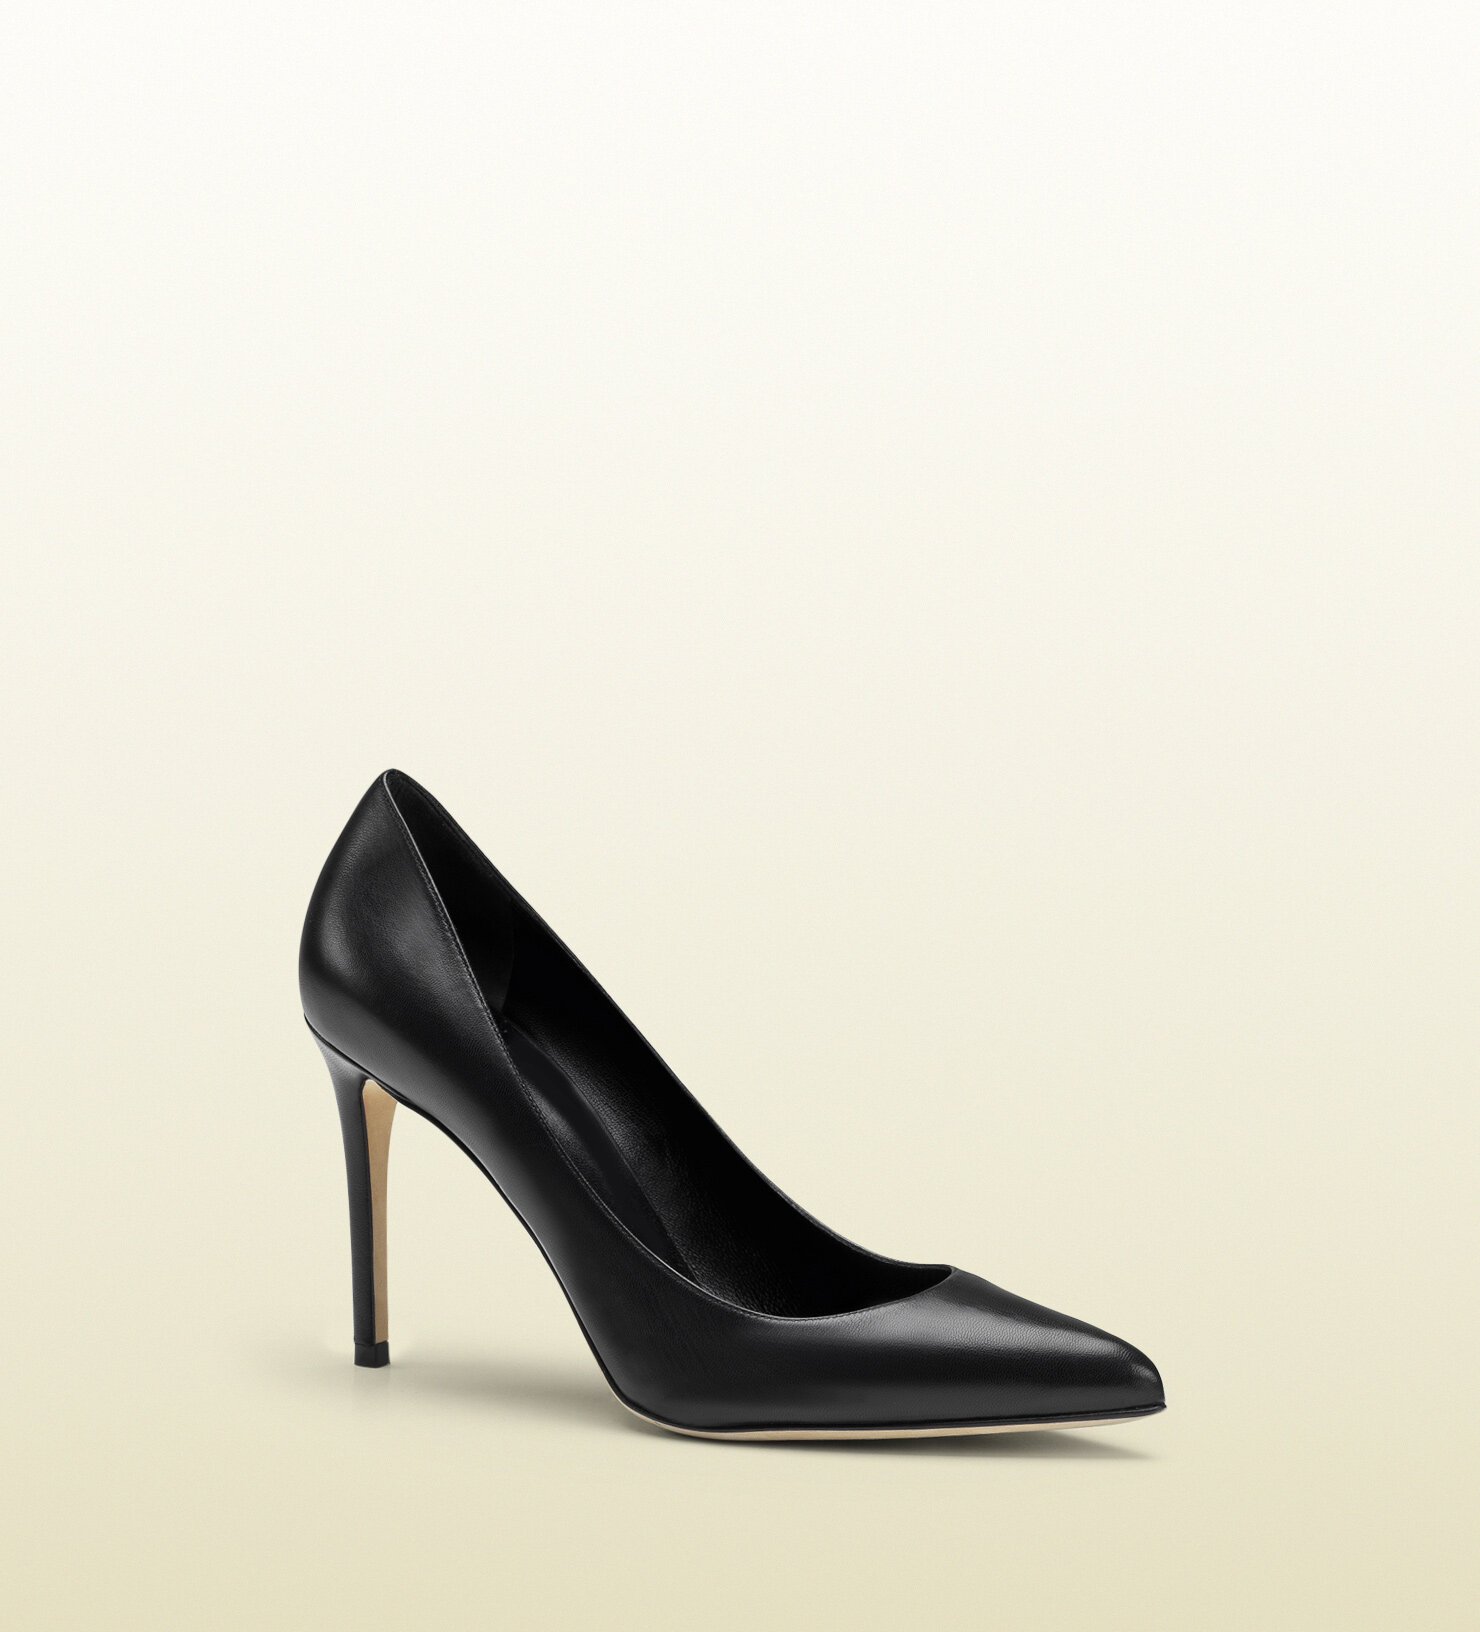 Gucci Leather Point-Toe Pumps in Black.jpg